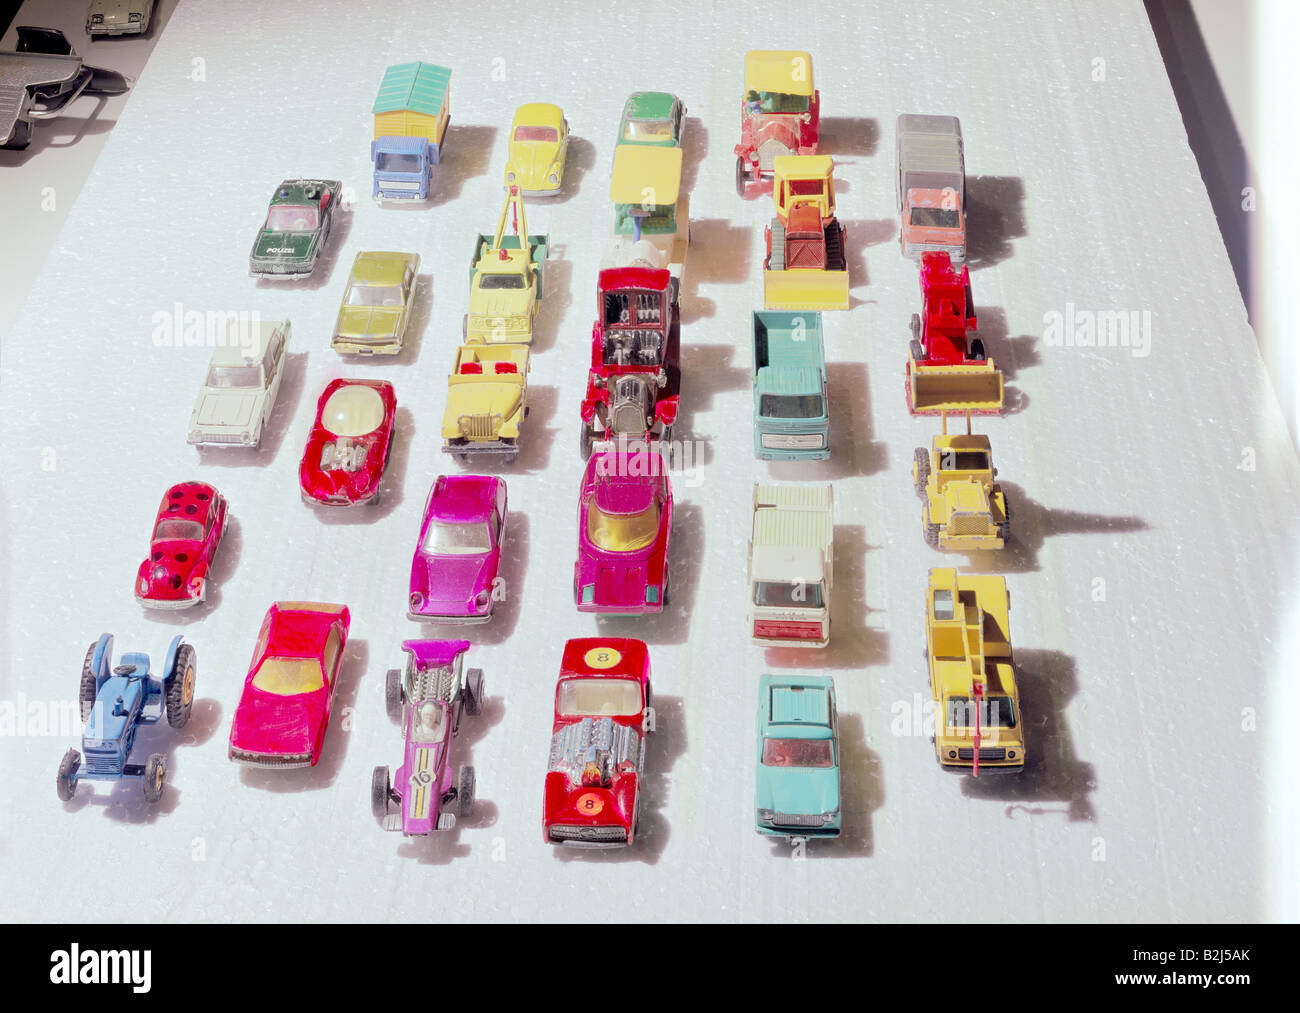 toys, toy cars, differtn types made by Matchbox, 1970 - 1975, Stock Photo